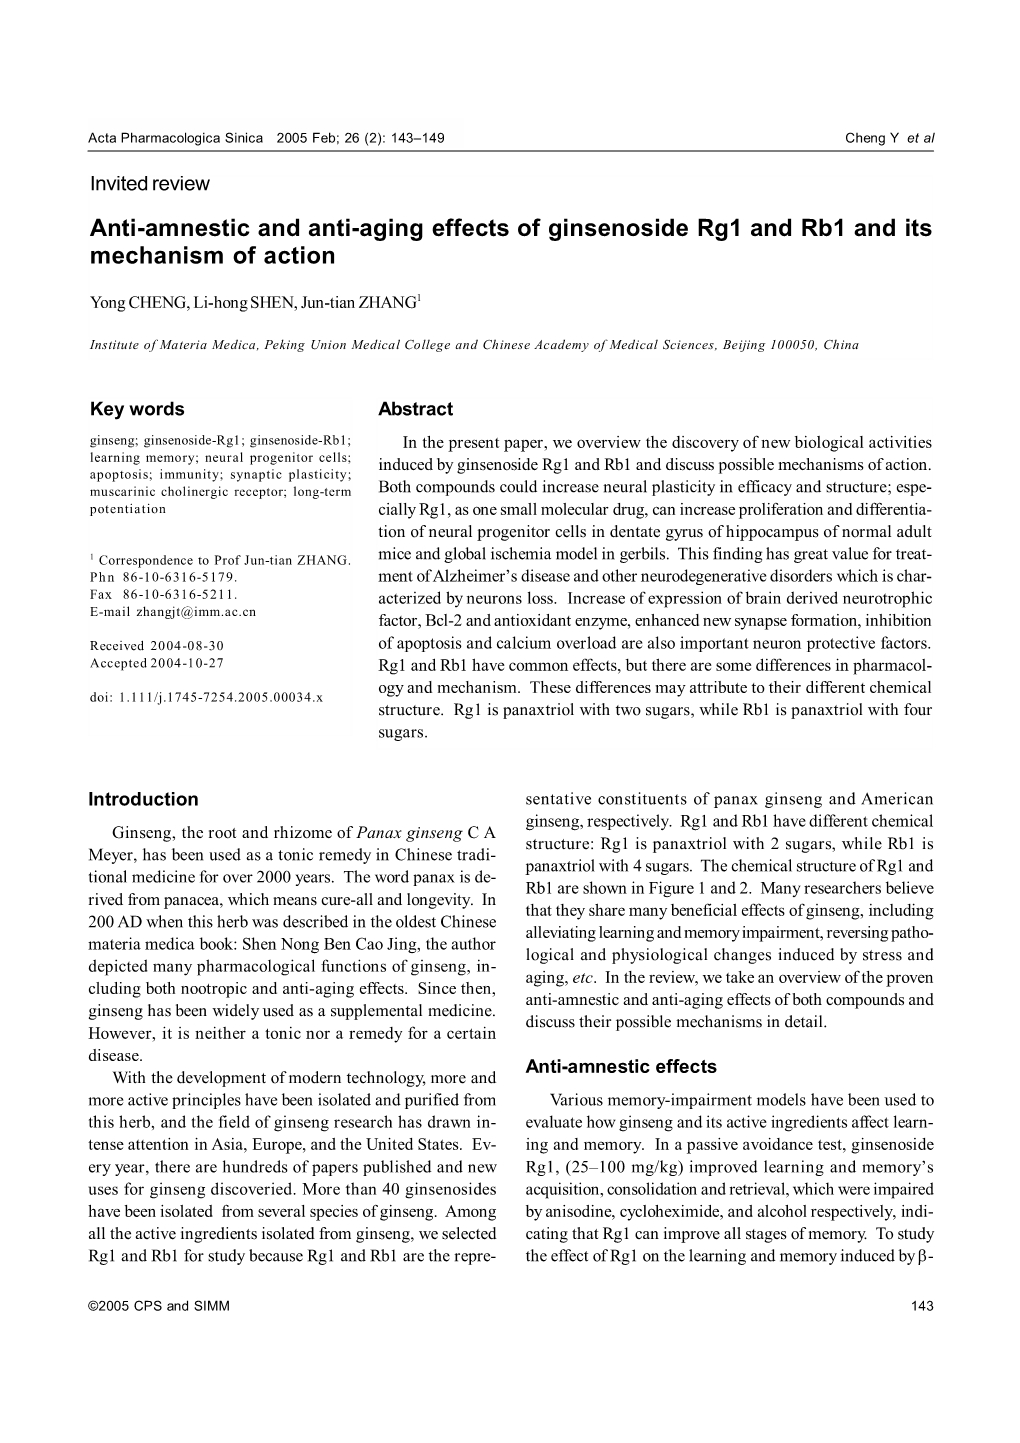 Anti-Amnestic and Anti-Aging Effects of Ginsenoside Rg1 and Rb1 and Its Mechanism of Action